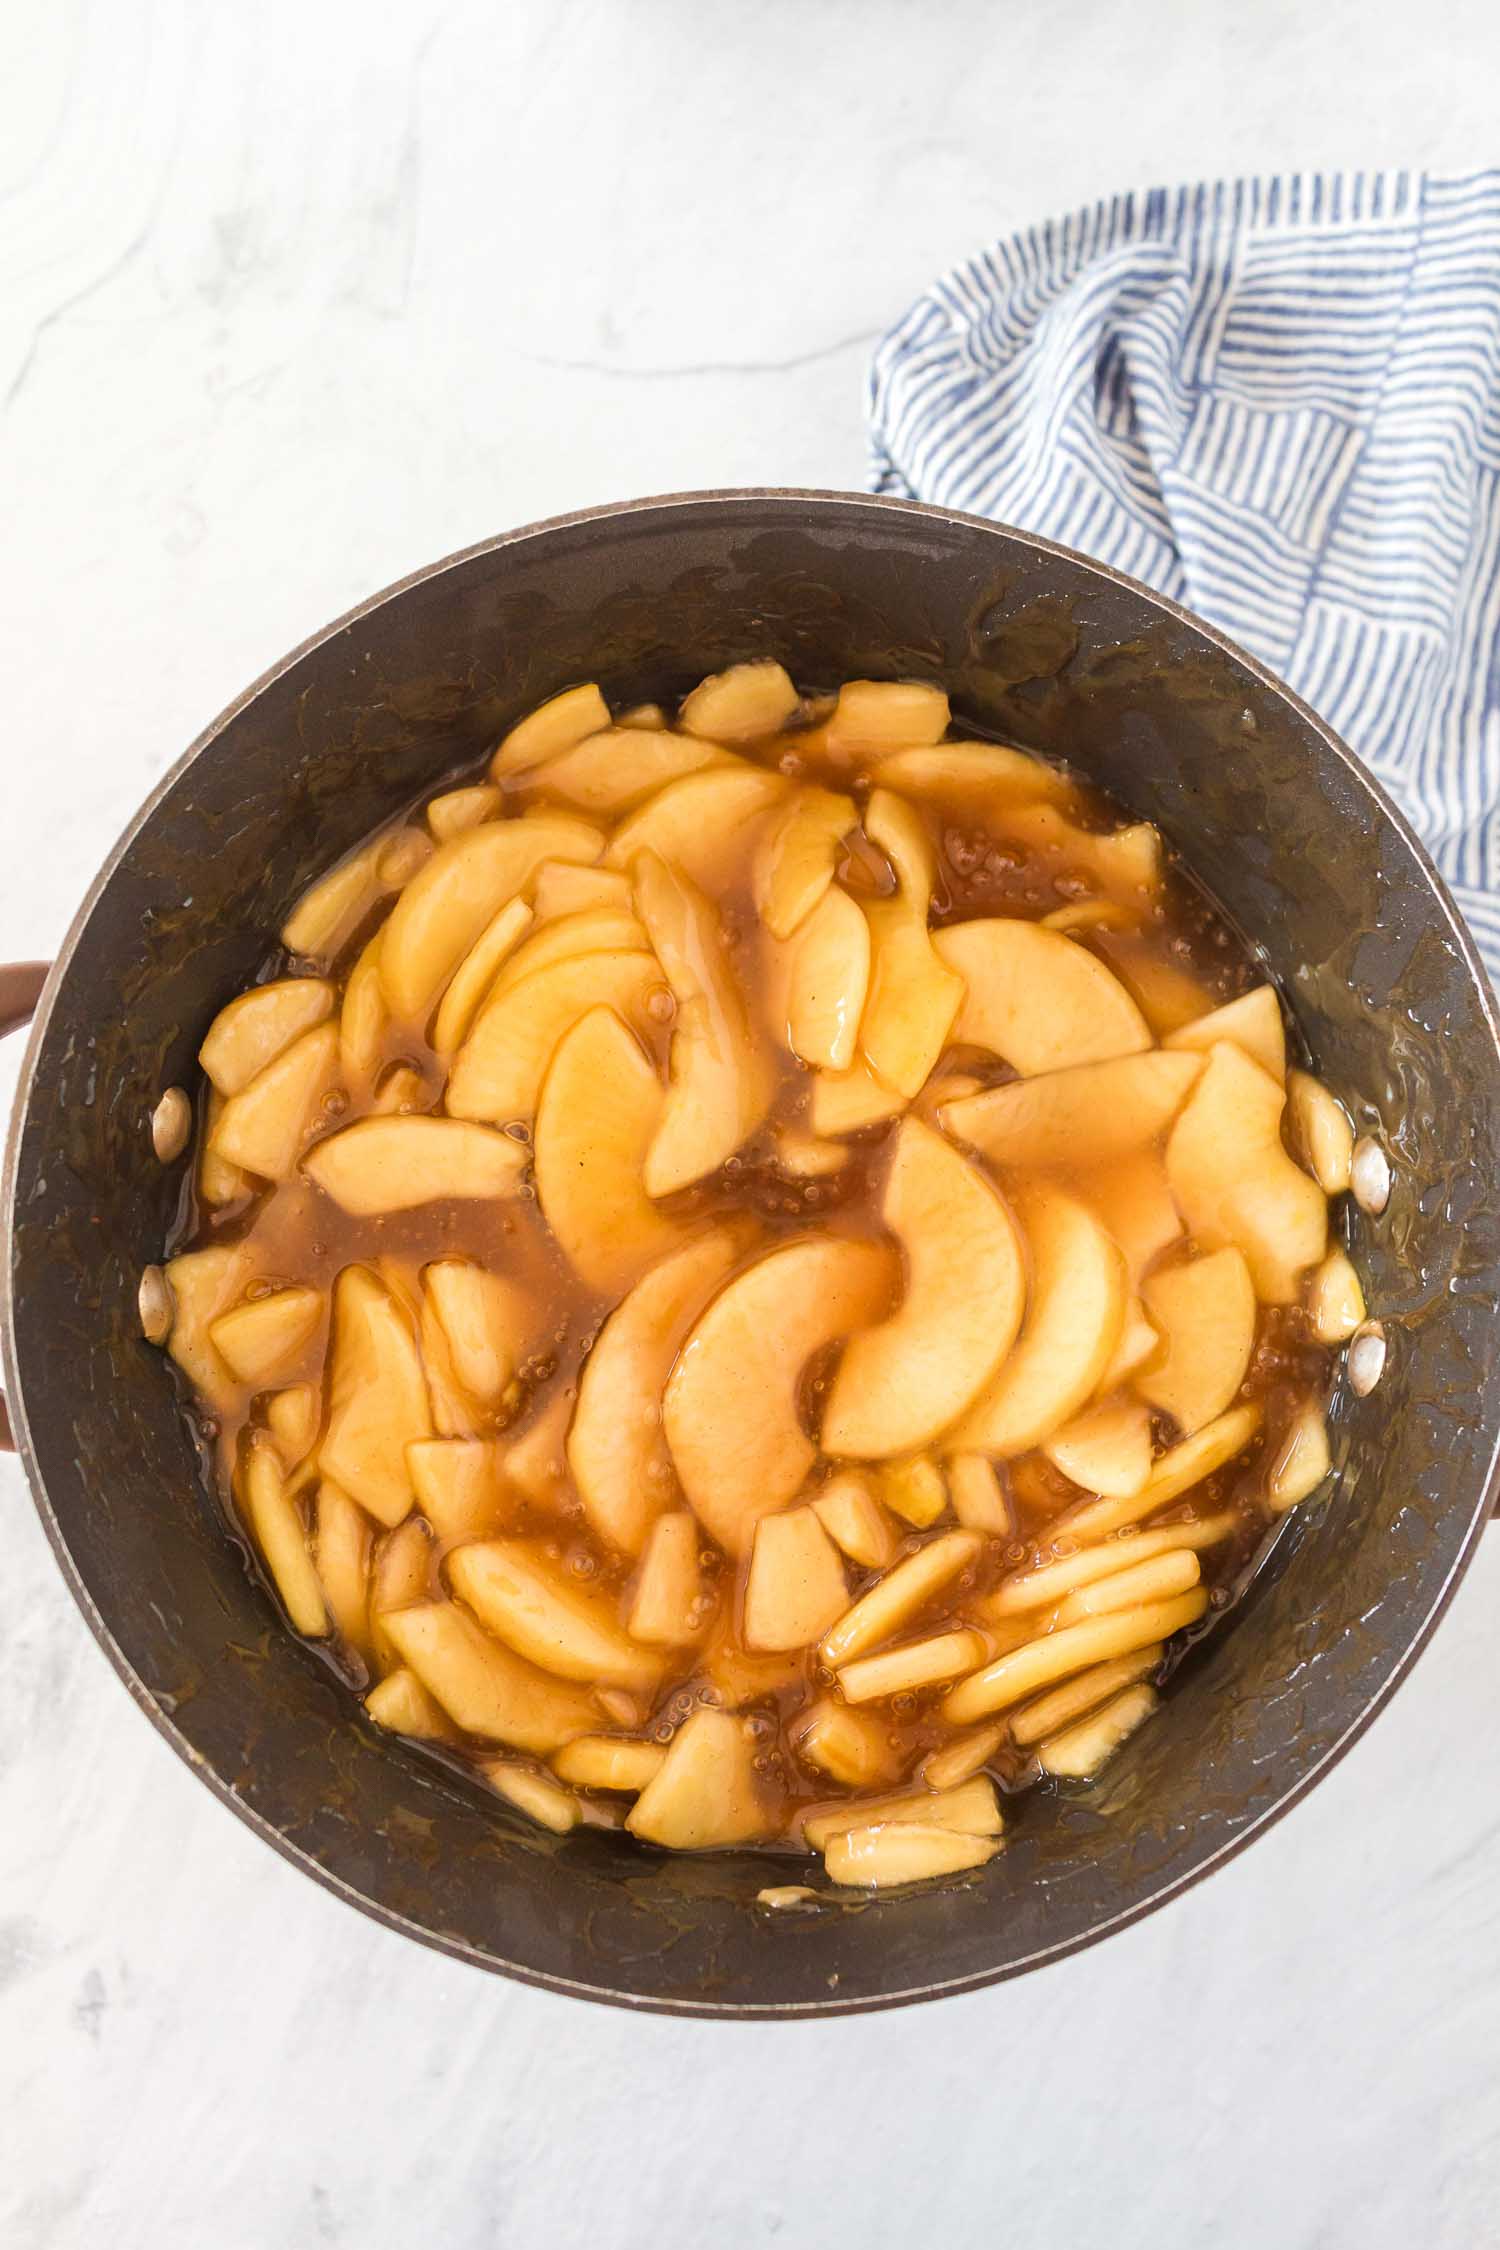 A crock pot full of cooked, sliced apples and spices with a blue and white striped towel in the corner.